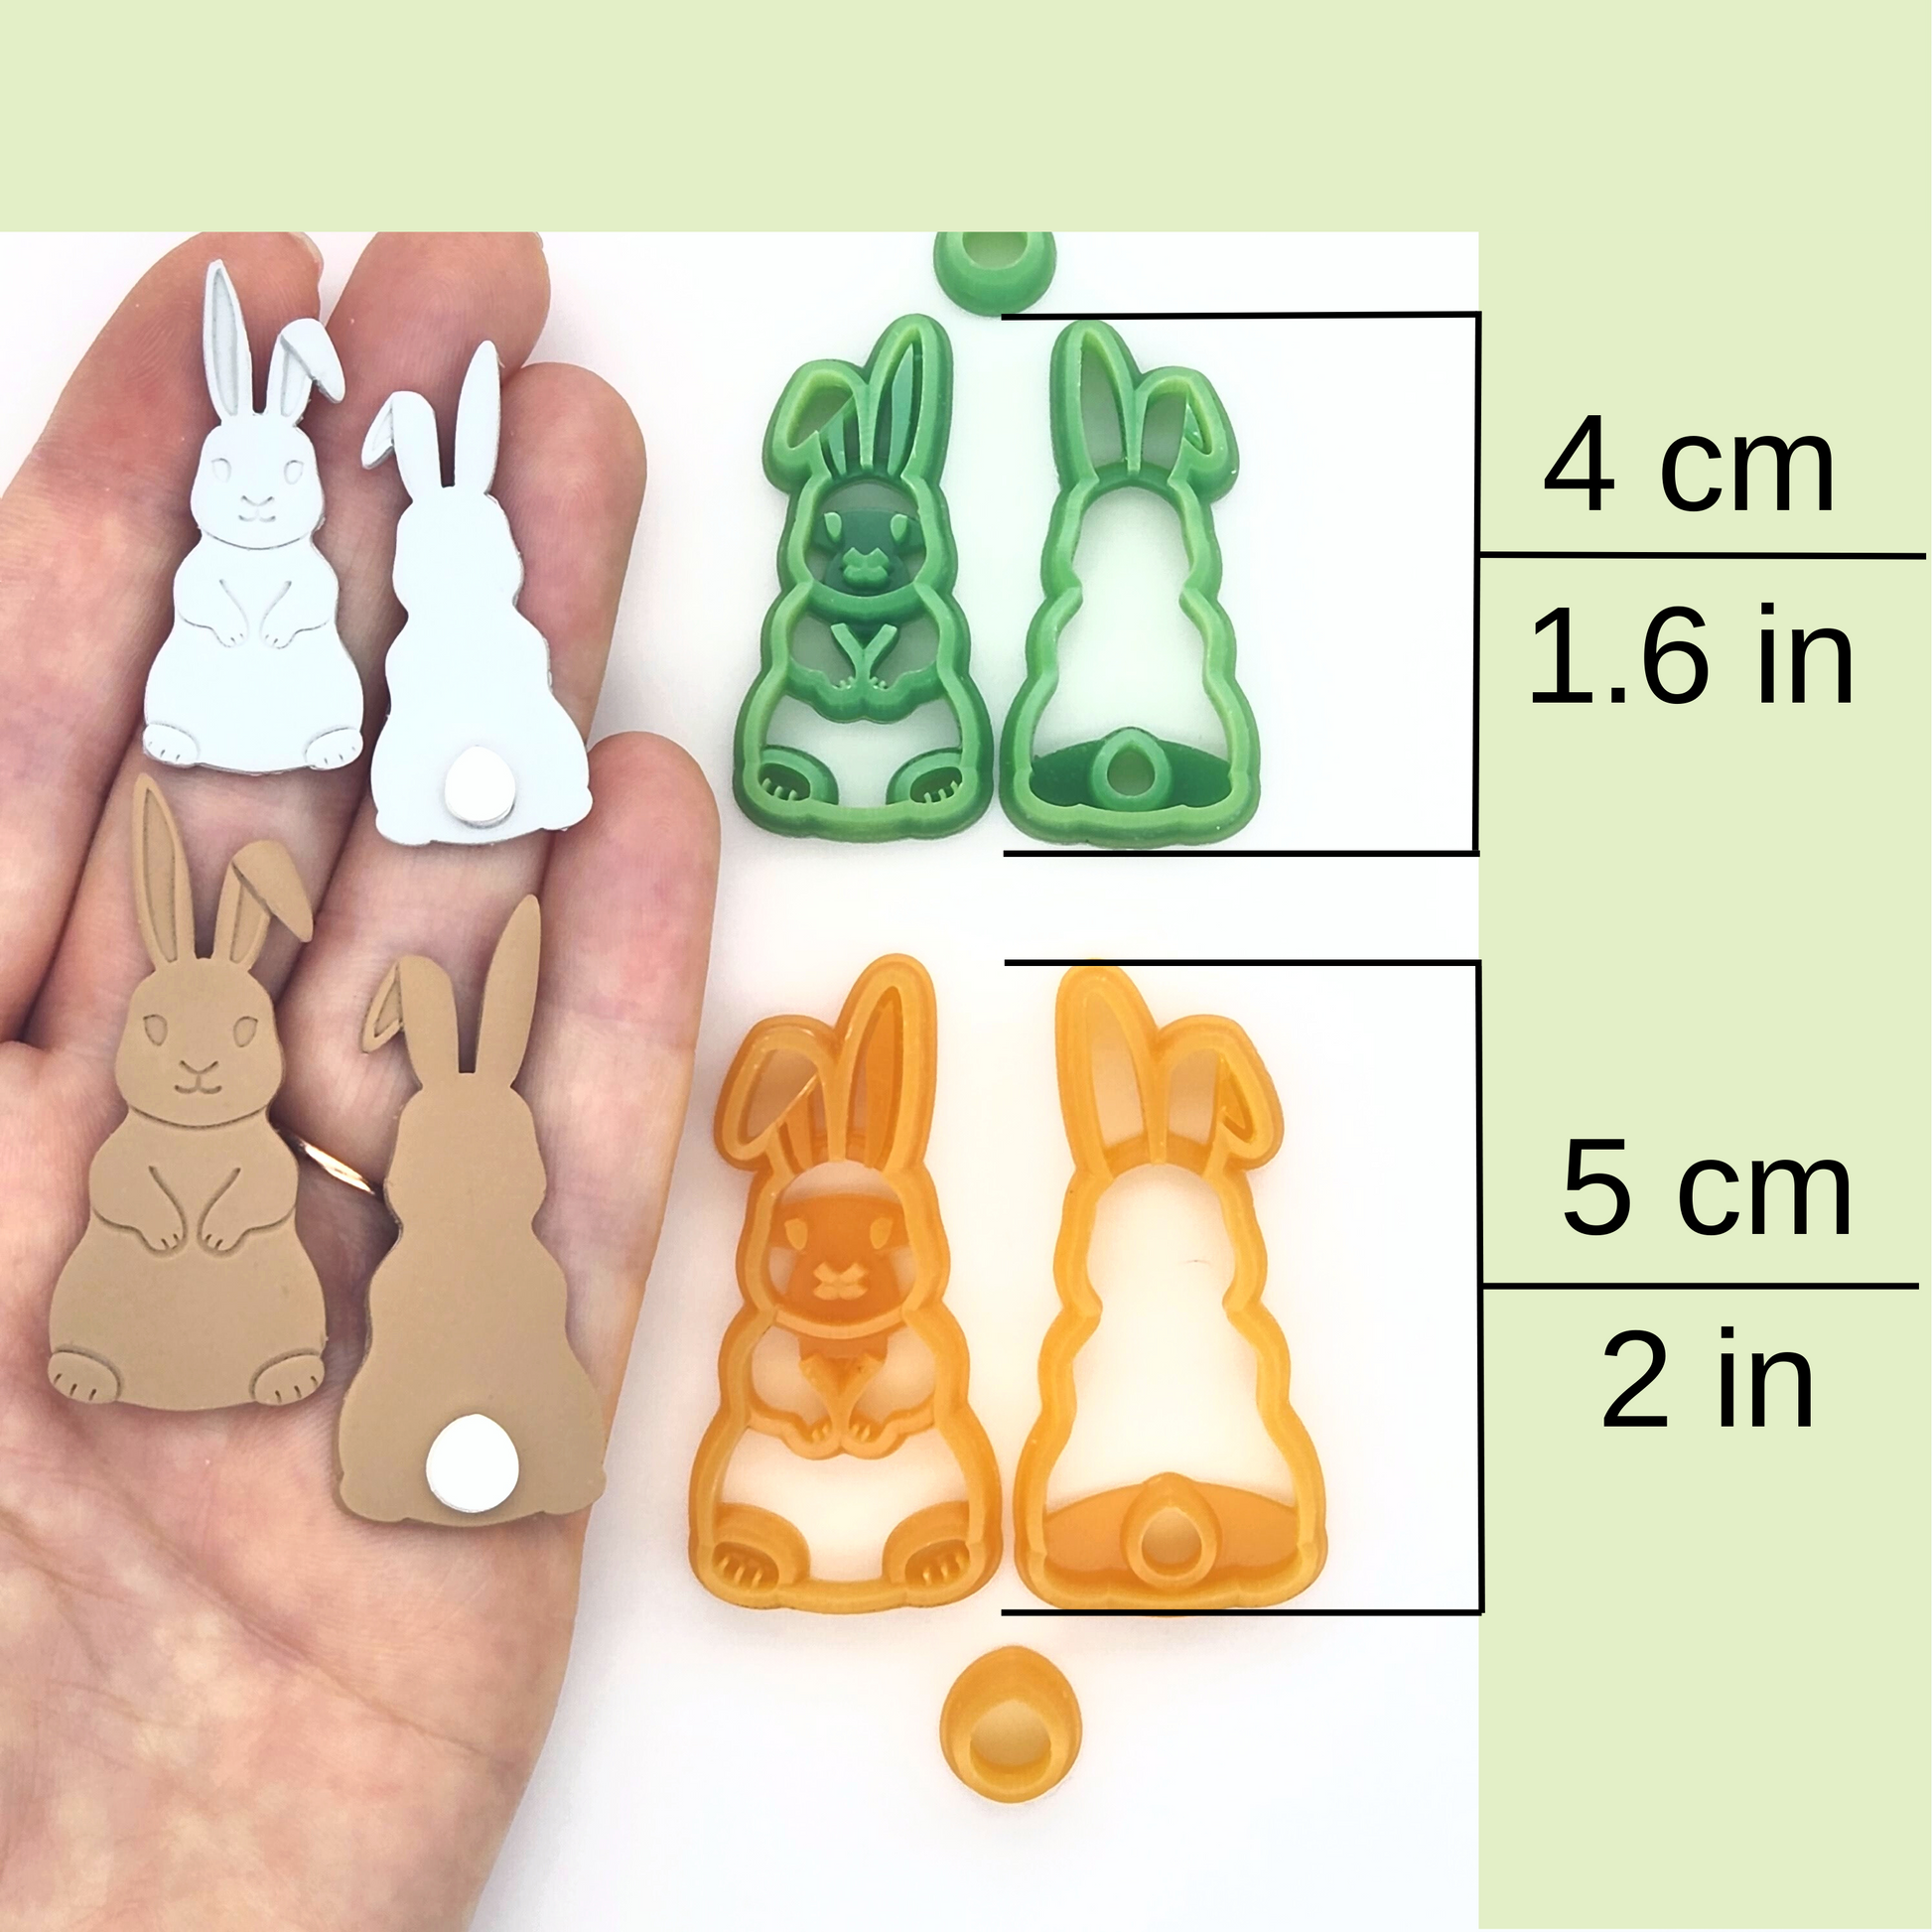 Double sided bunny set is available in two sizes 4 cm / 1.6 in, and 5 cm / 2 in